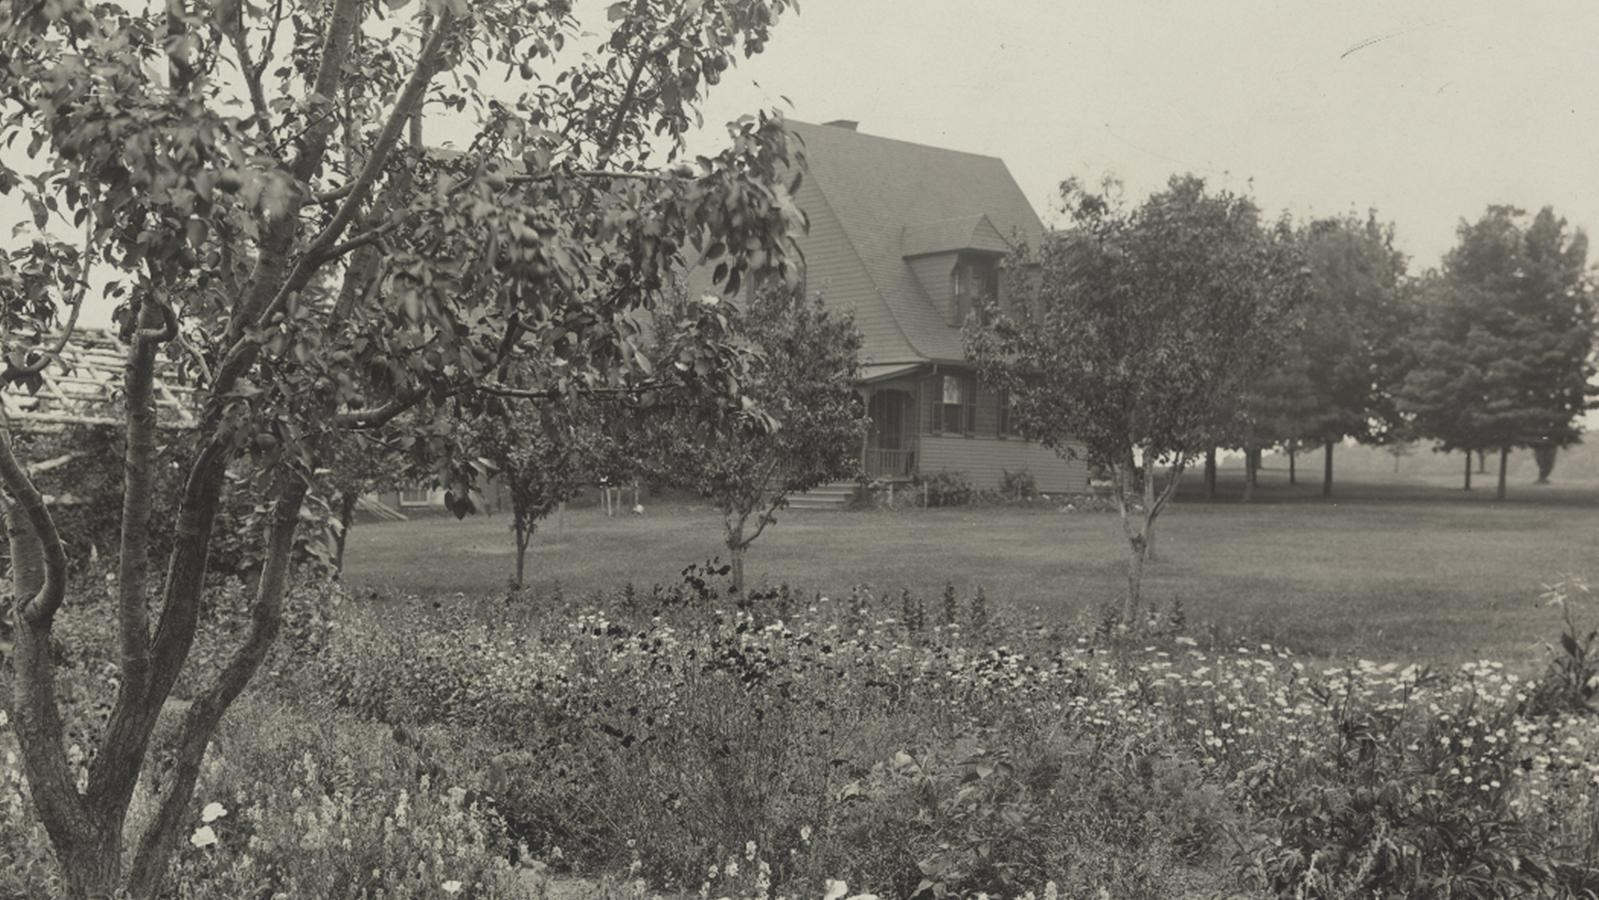 Stable & Lodge, Gardens at Sagamore Hill